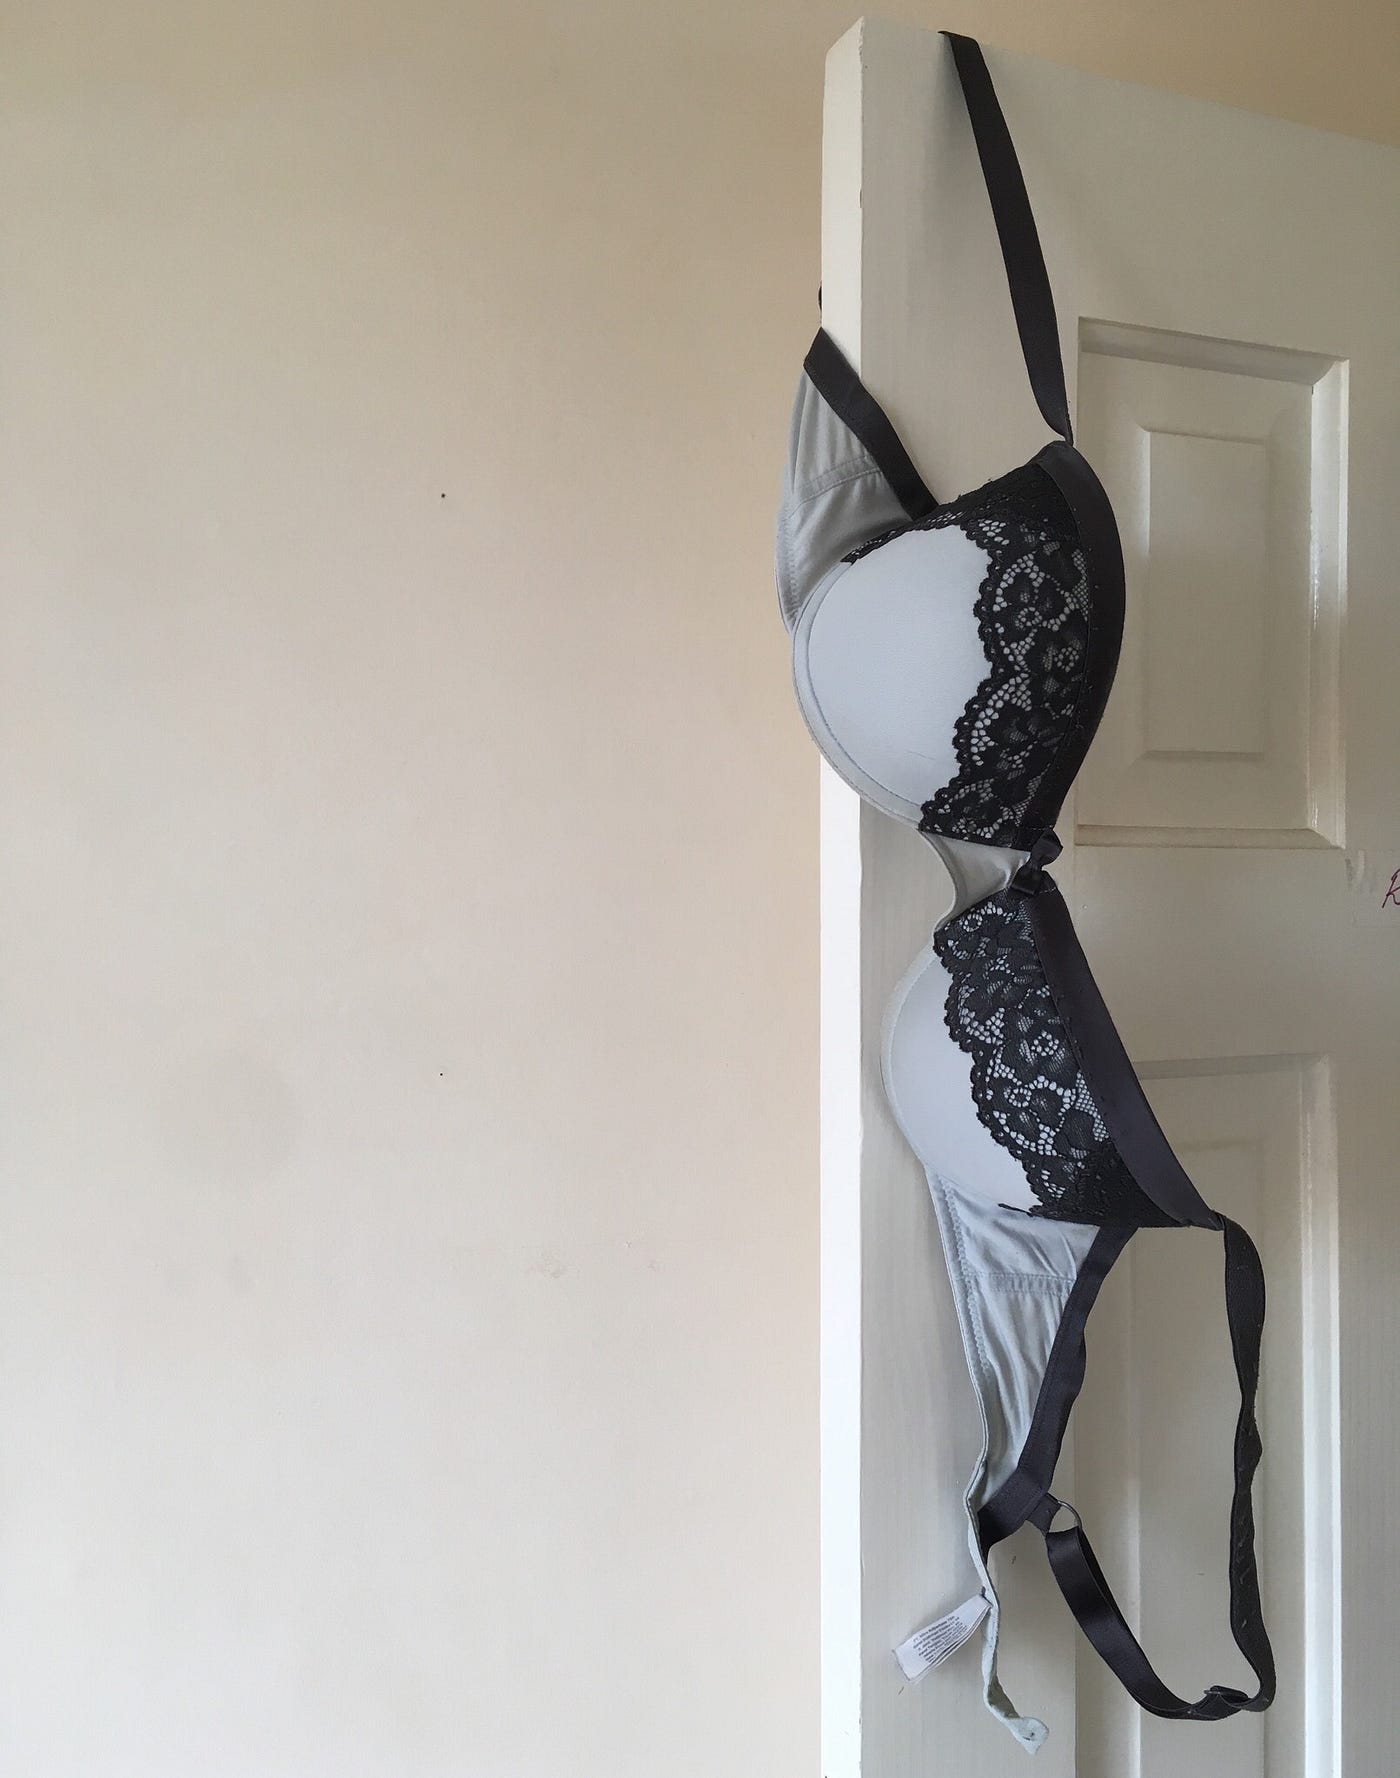 173: The Bra. An object of support, or constraint?, by Katie Harling-Lee, Objects